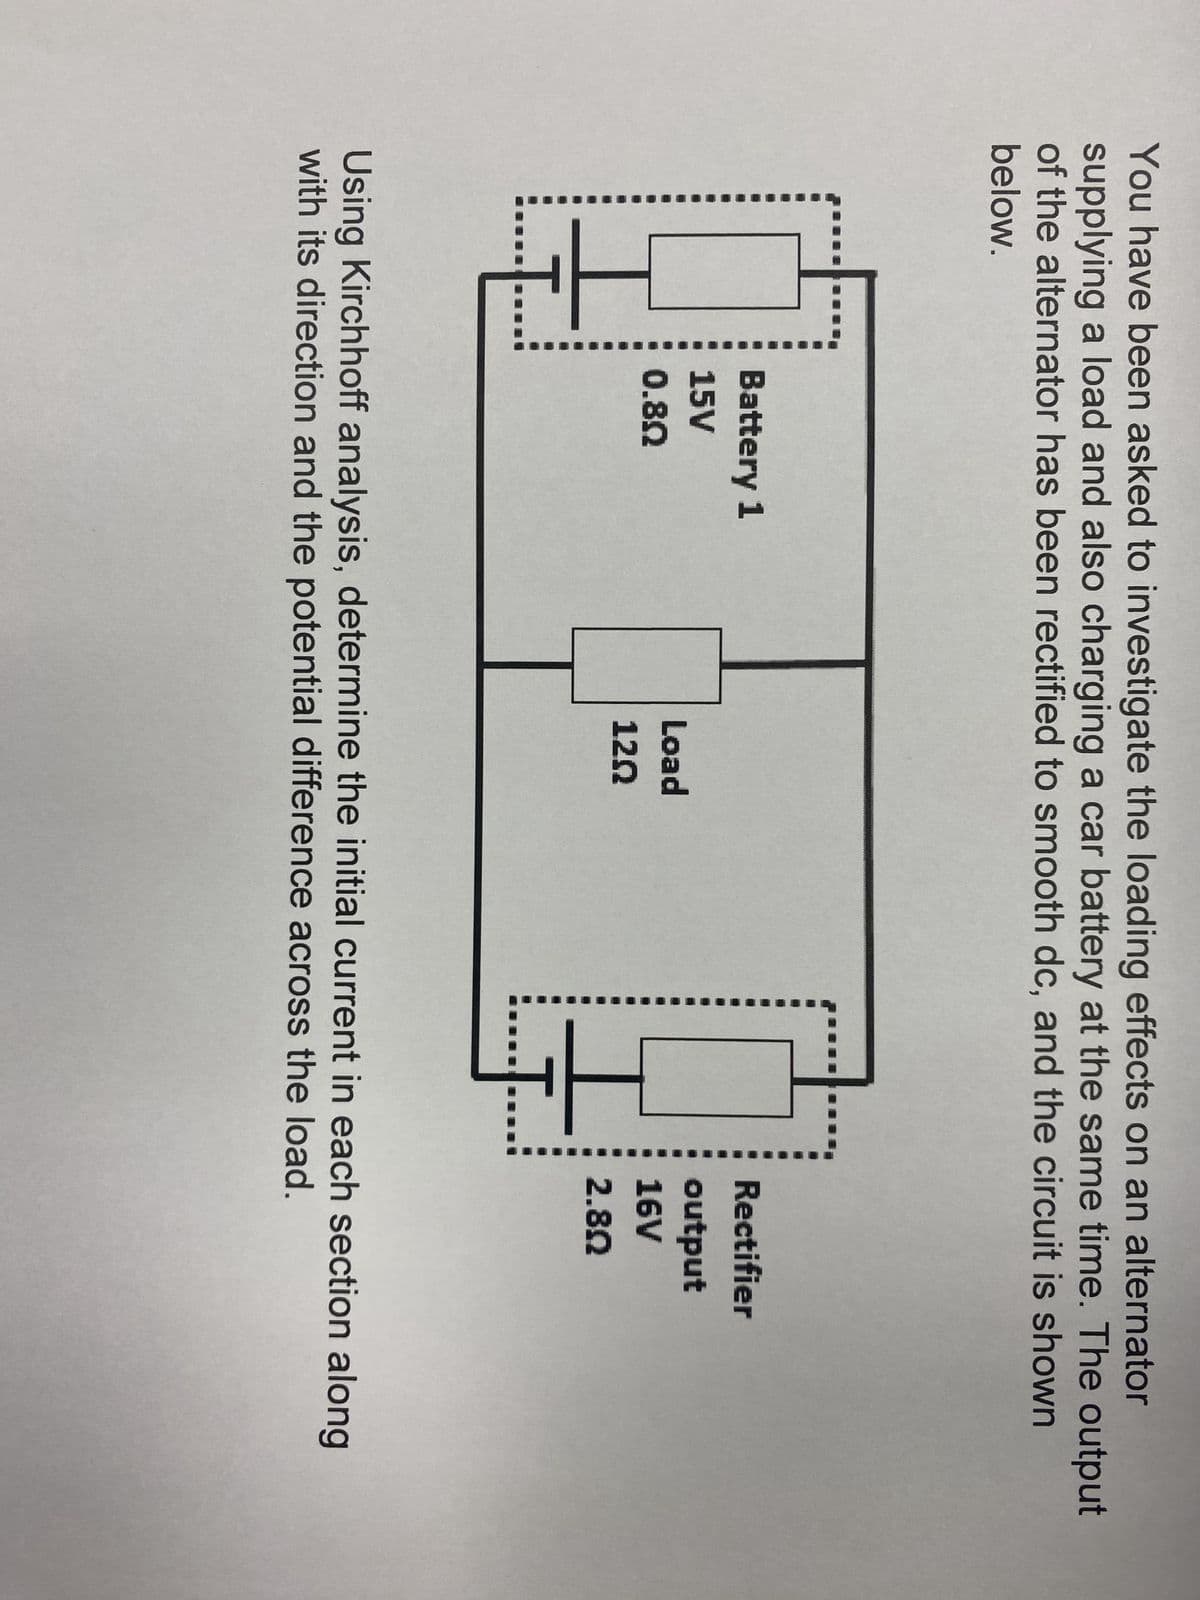 You have been asked to investigate the loading effects on an alternator
supplying a load and also charging a car battery at the same time. The output
of the alternator has been rectified to smooth dc, and the circuit is shown
below.
HH
Battery 1
15V
0.80
Load
120
H
..J.
Rectifier
output
16V
2.80
Using Kirchhoff analysis, determine the initial current in each section along
with its direction and the potential difference across the load.